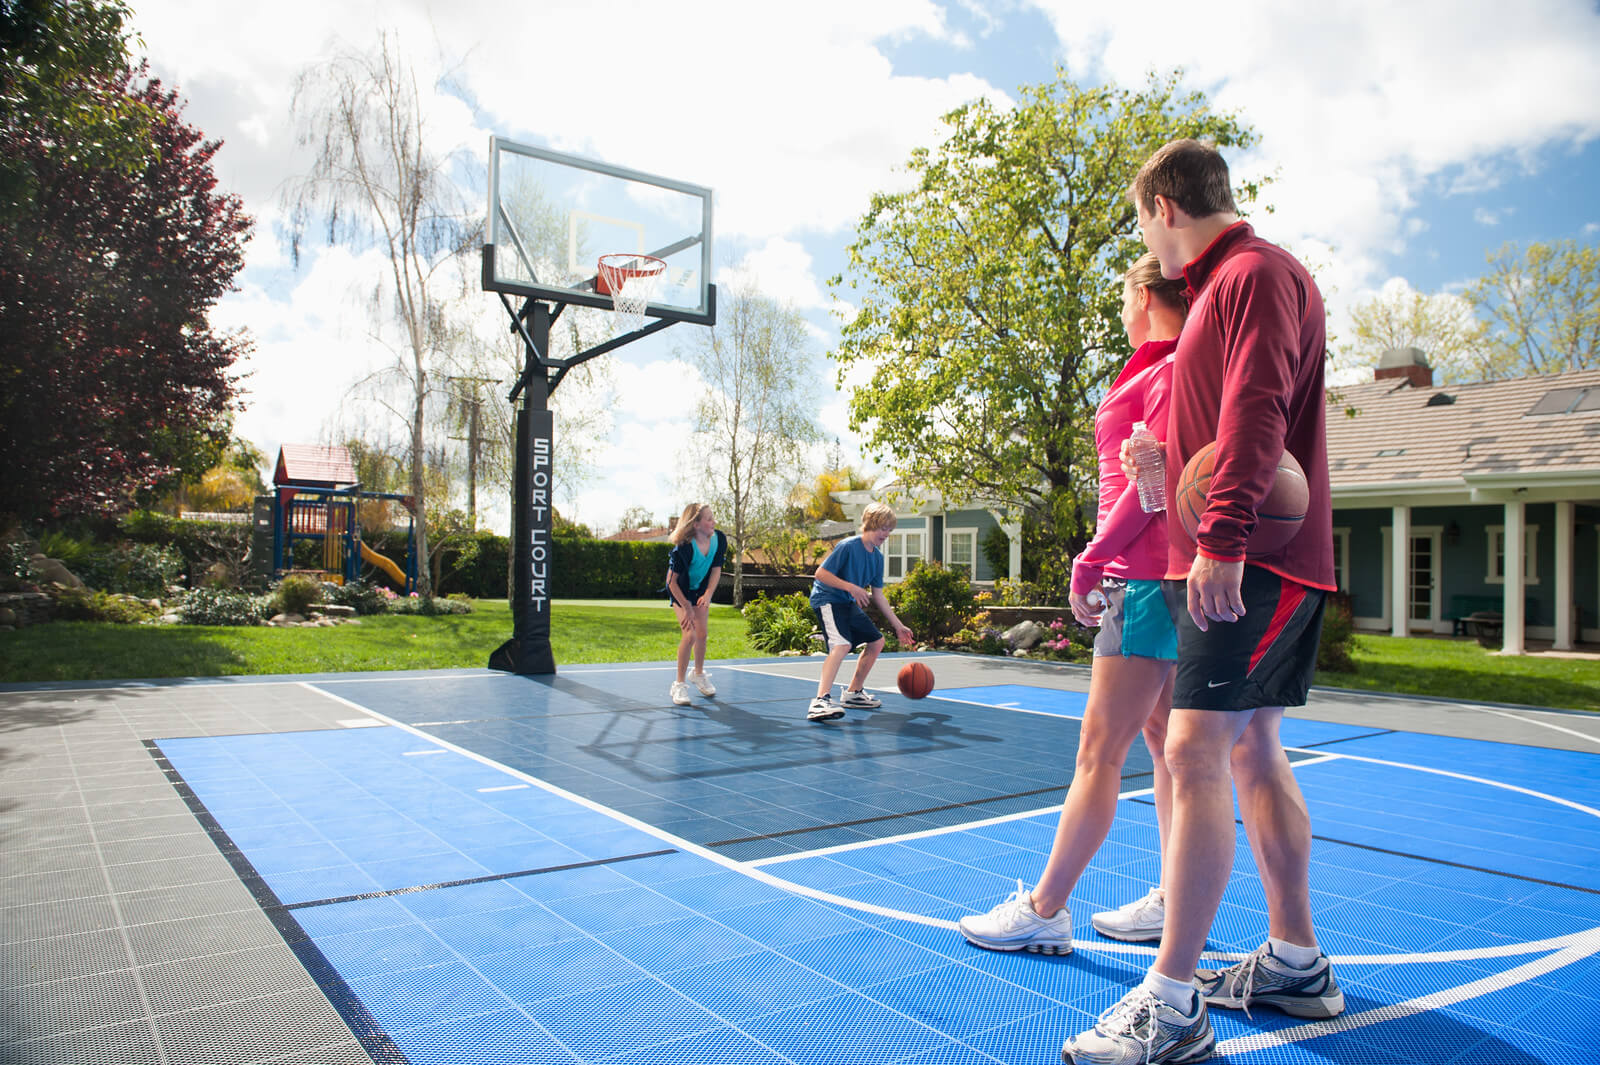 How Much Does A Home Basketball Court Cost Discount Save 55% jlcatj